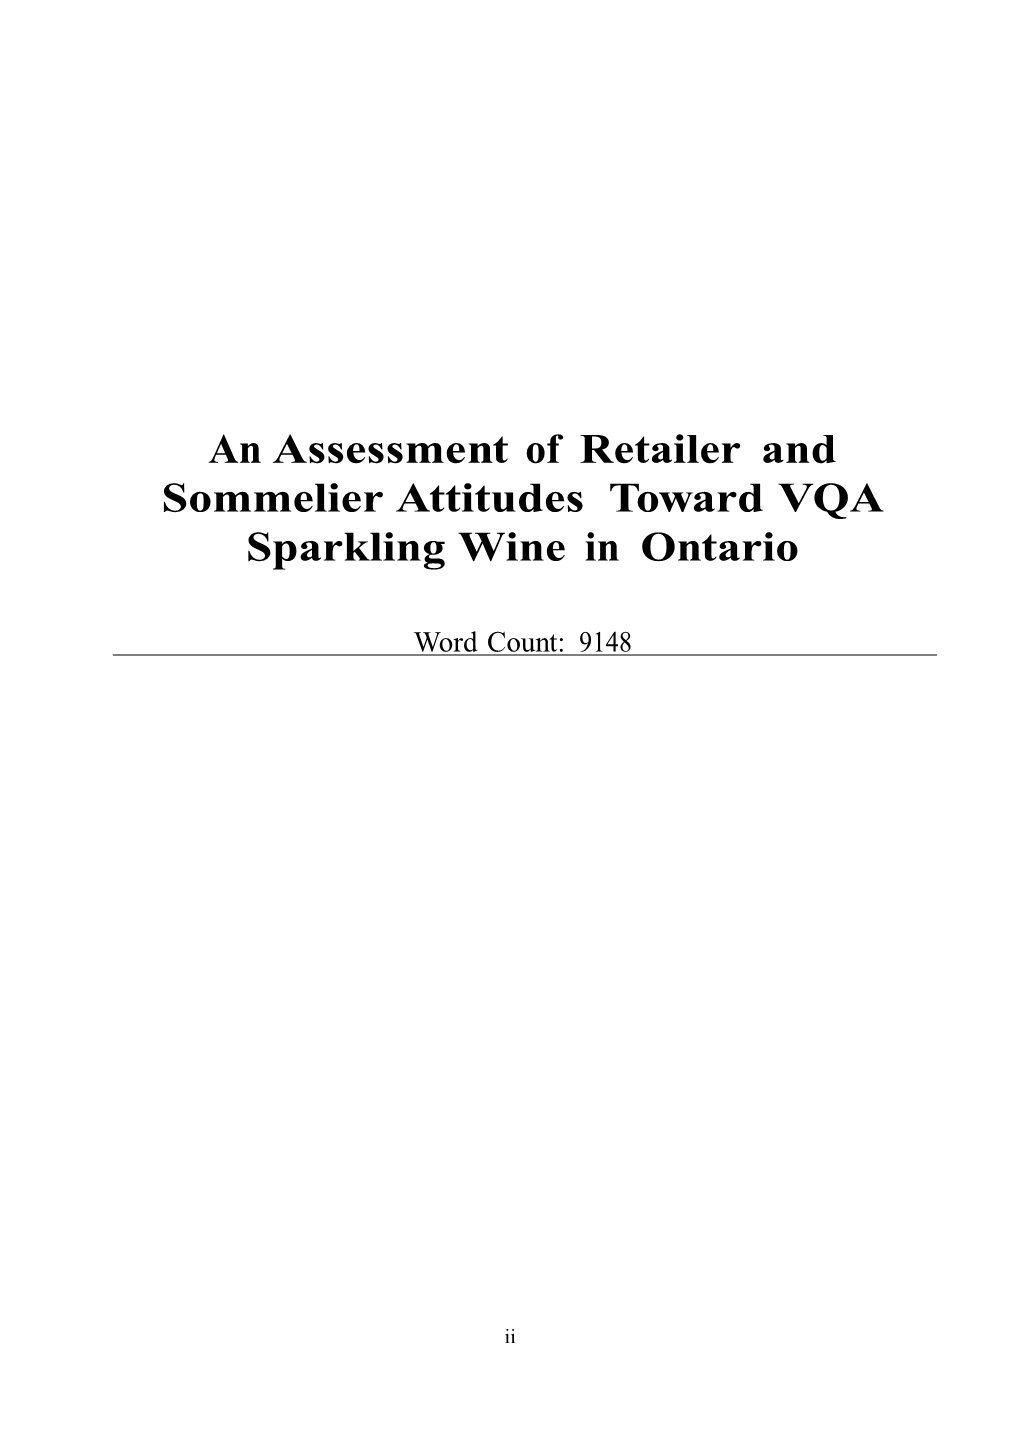 An Assessment of Retailer and Sommelier Attitudes Toward VQA Sparkling Wine in Ontario